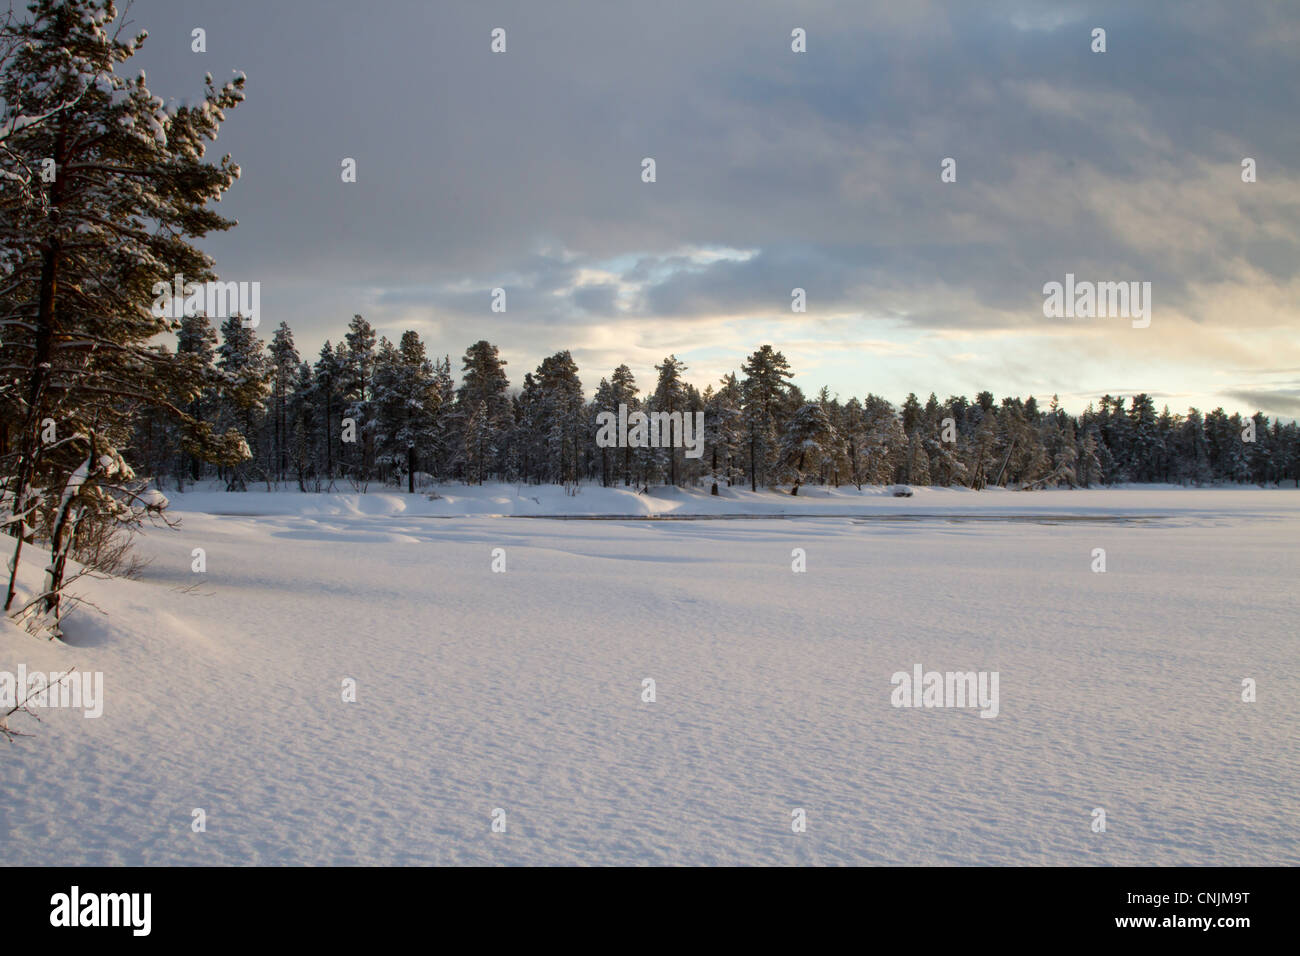 Christmas Scene, Forest around a frozen lake with snow on it.  Lapland, Northern Finland Stock Photo